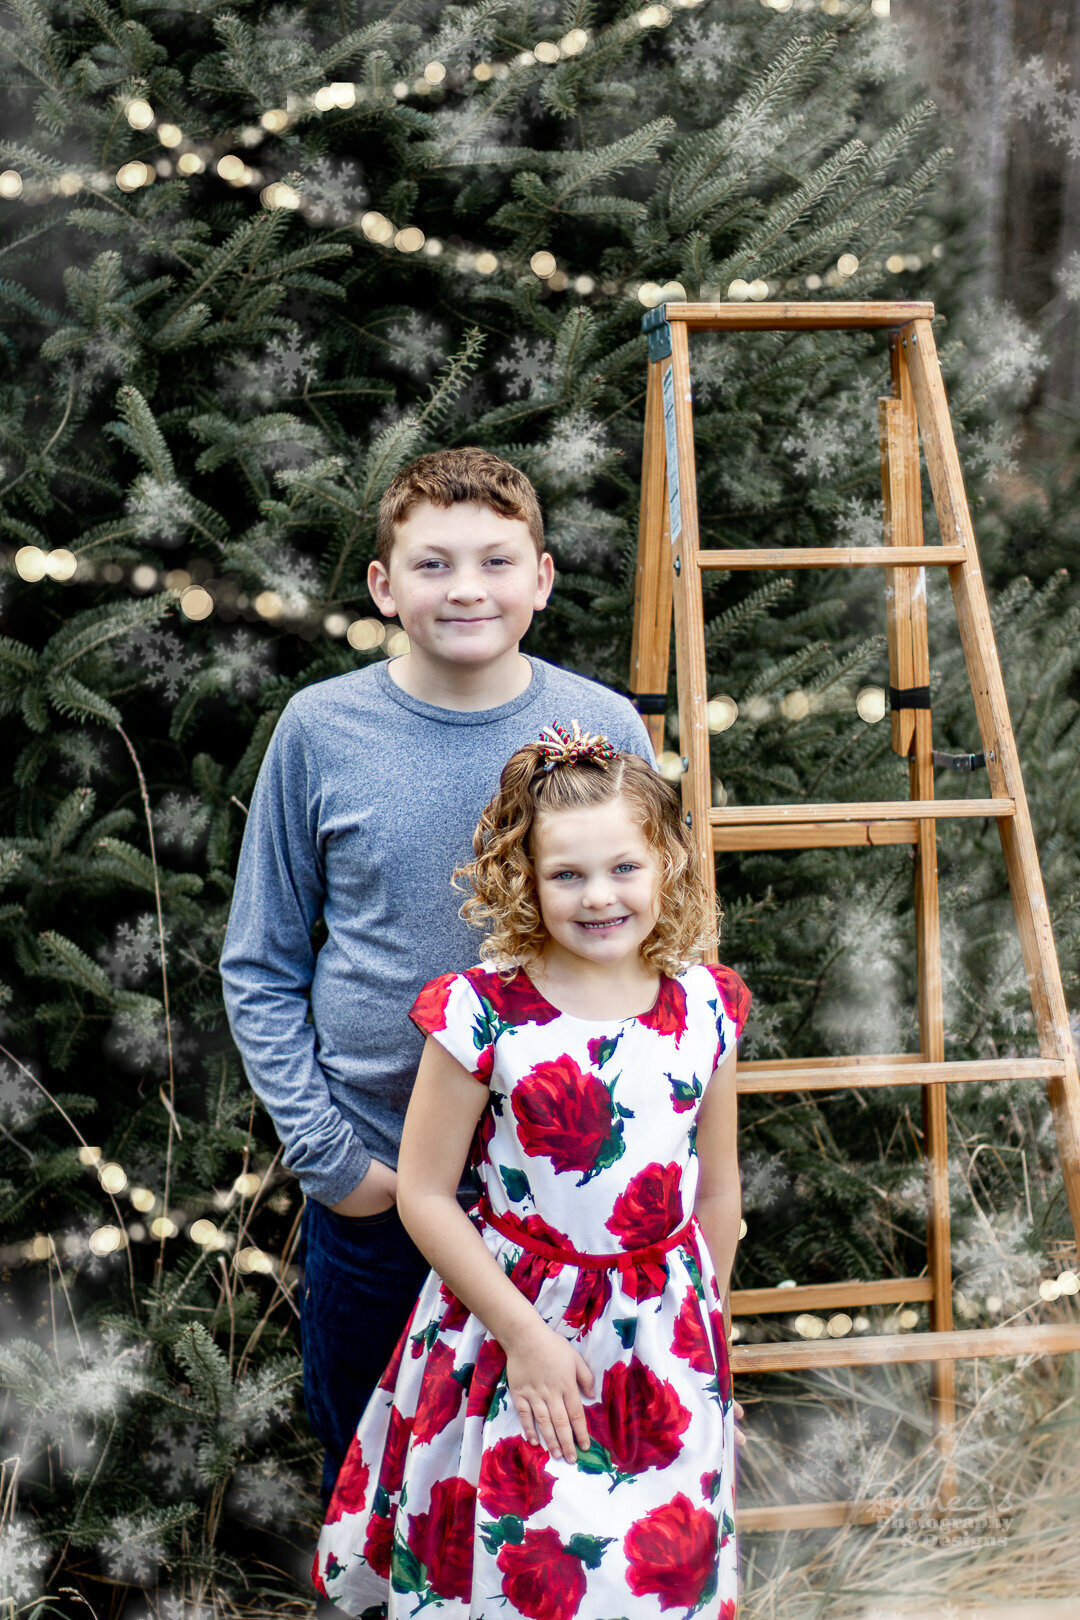 renees-photography-and-designs_christmas-tree-farm_family-children-photoshoot_new-river-valley_blue-ridge-mountains-sm-2-2